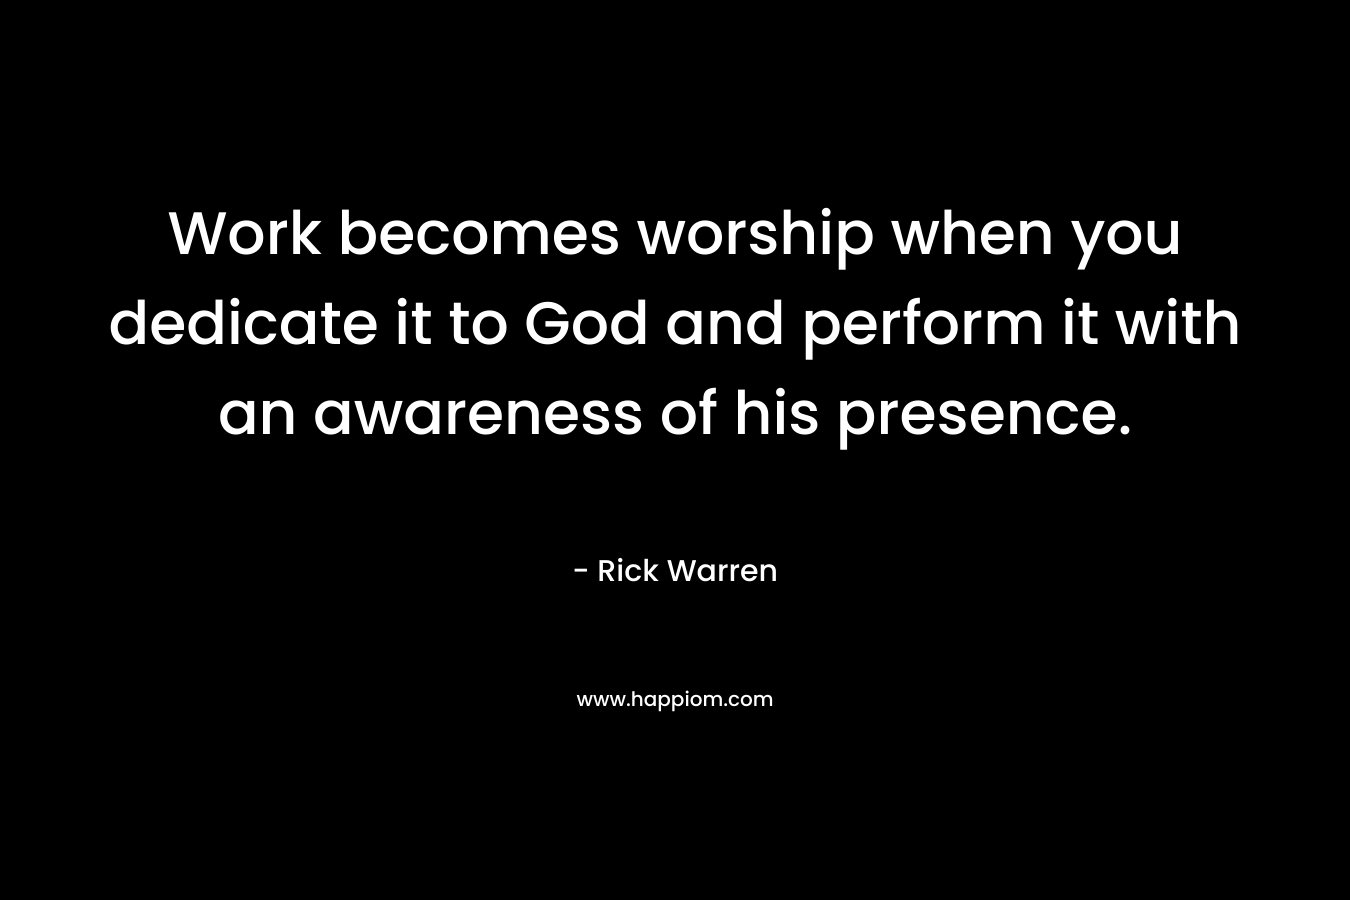 Work becomes worship when you dedicate it to God and perform it with an awareness of his presence. – Rick Warren